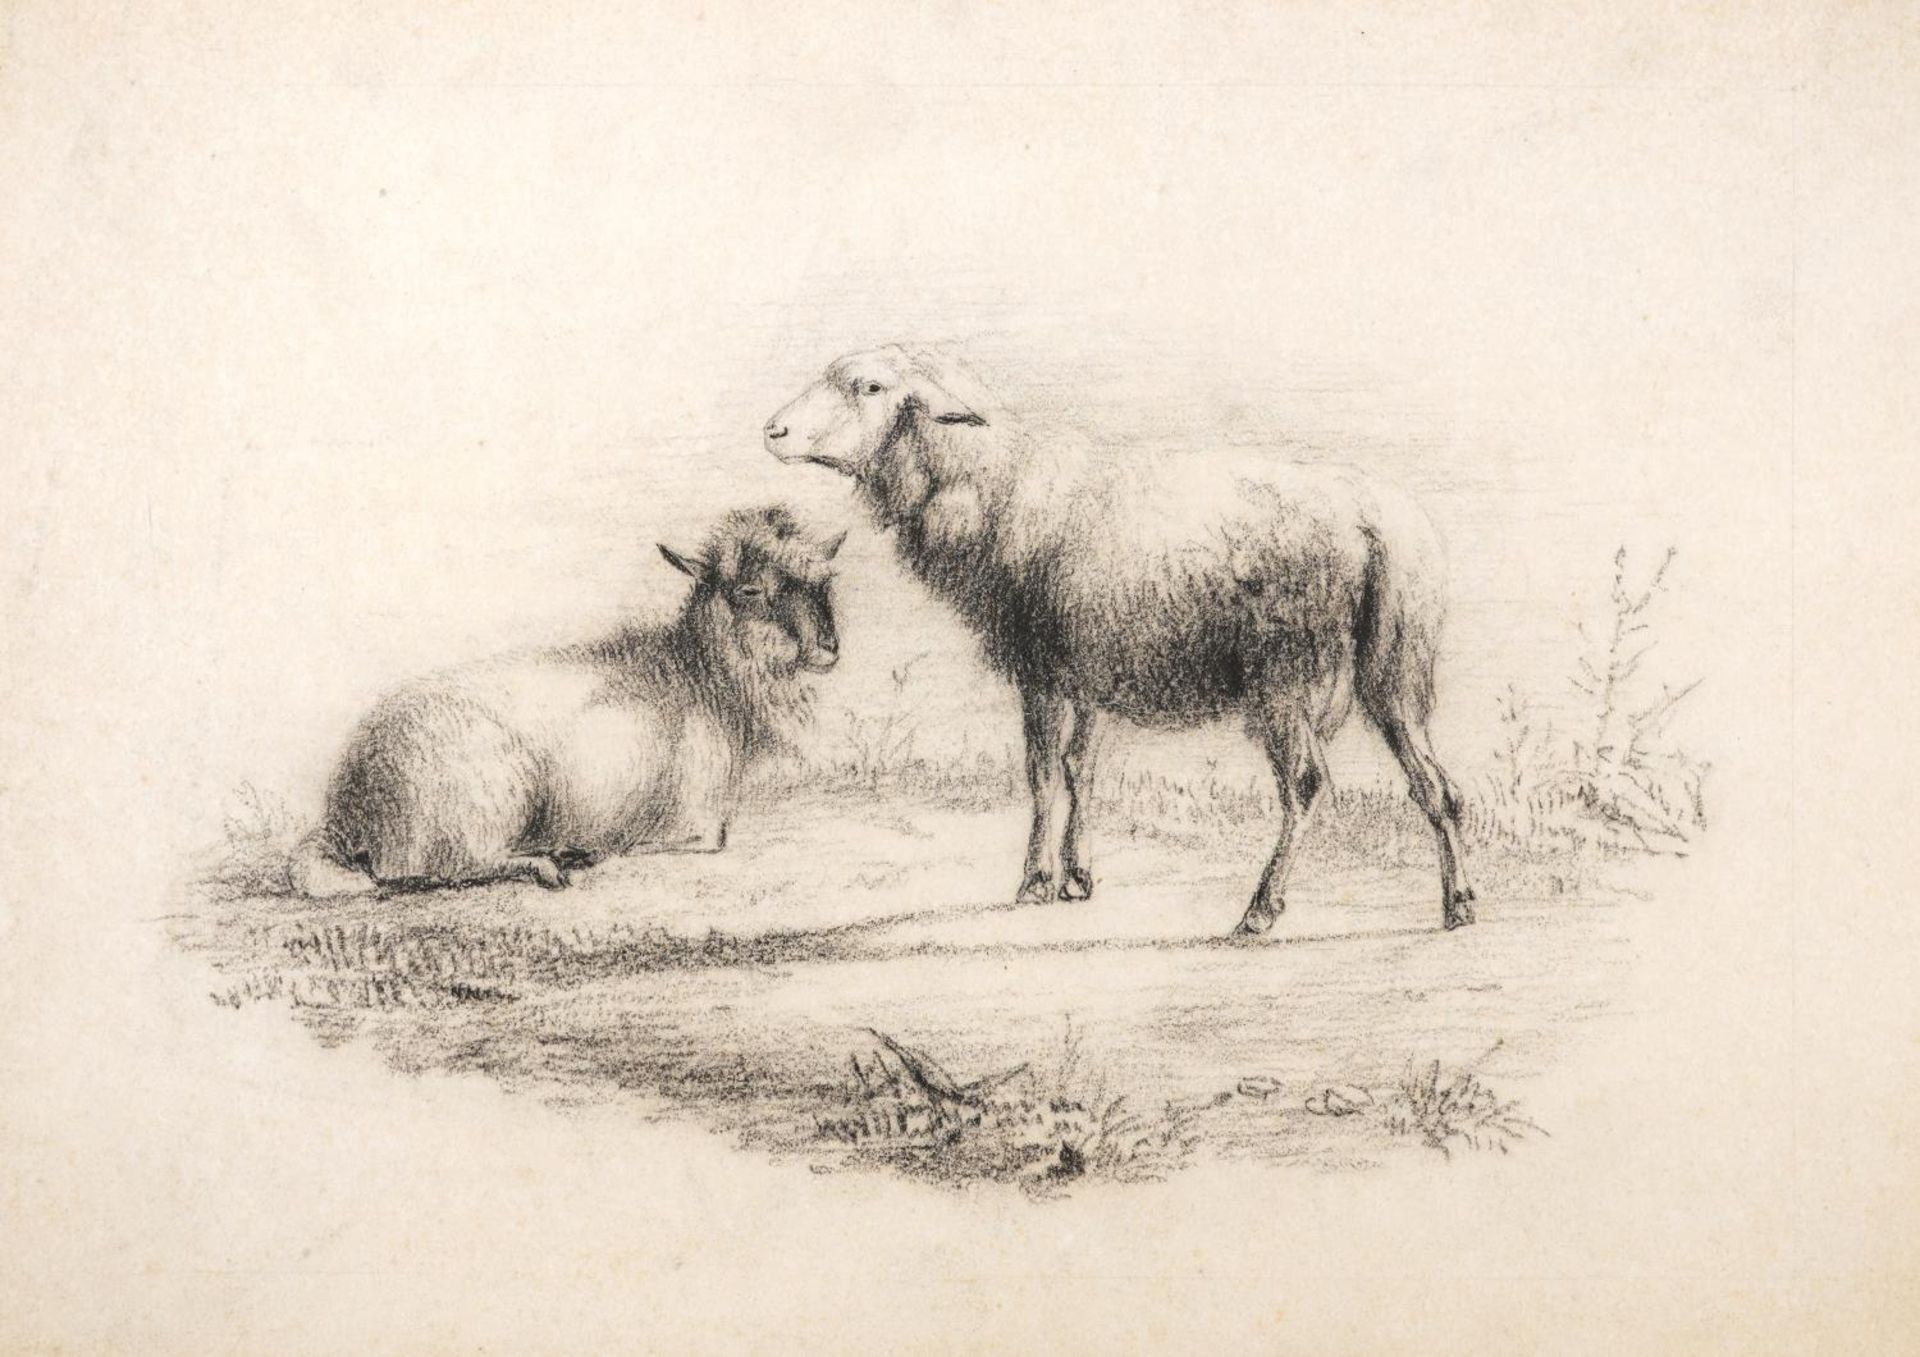 Attributed to Thomas Sidney Cooper - Sheep in a landscape, 19th century charcoal on paper, unframed,